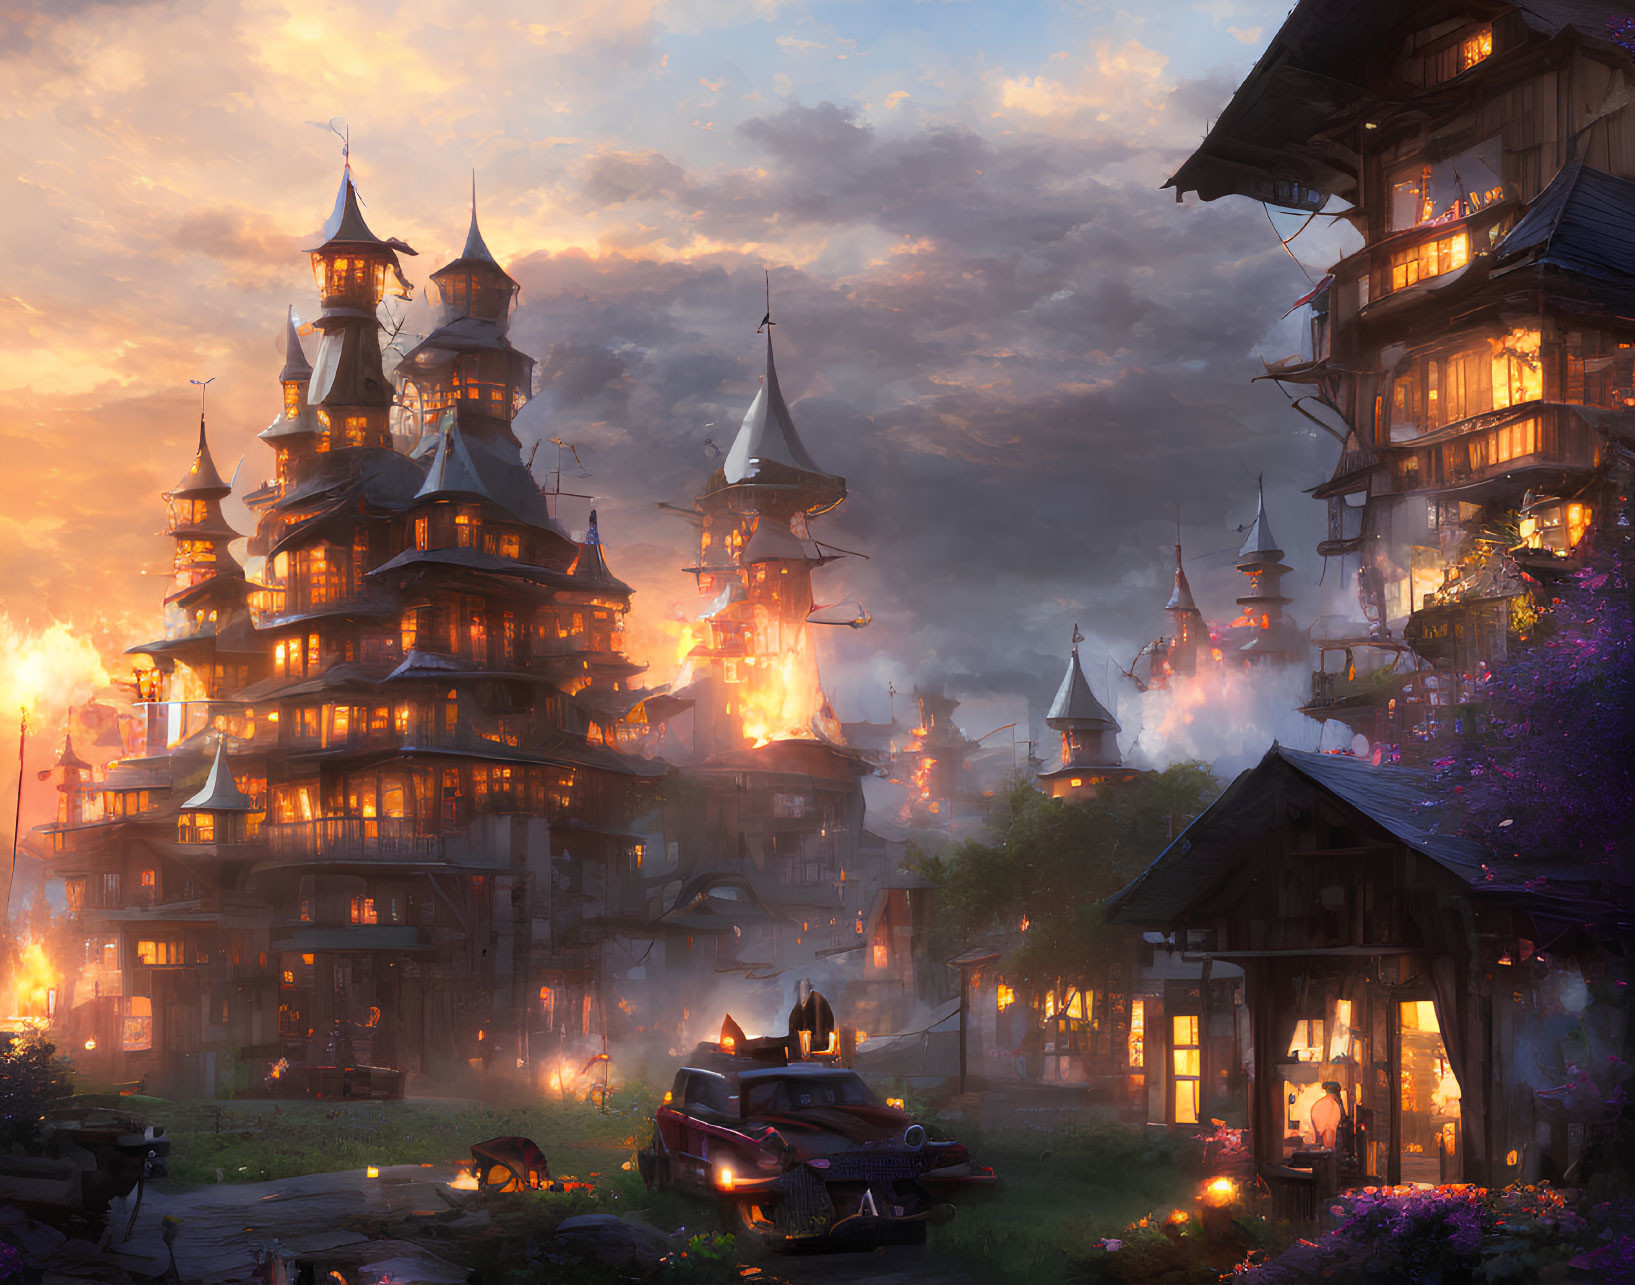 Sunset fantasy village with pagoda-like structures, vintage car, cottages, and blooming flowers